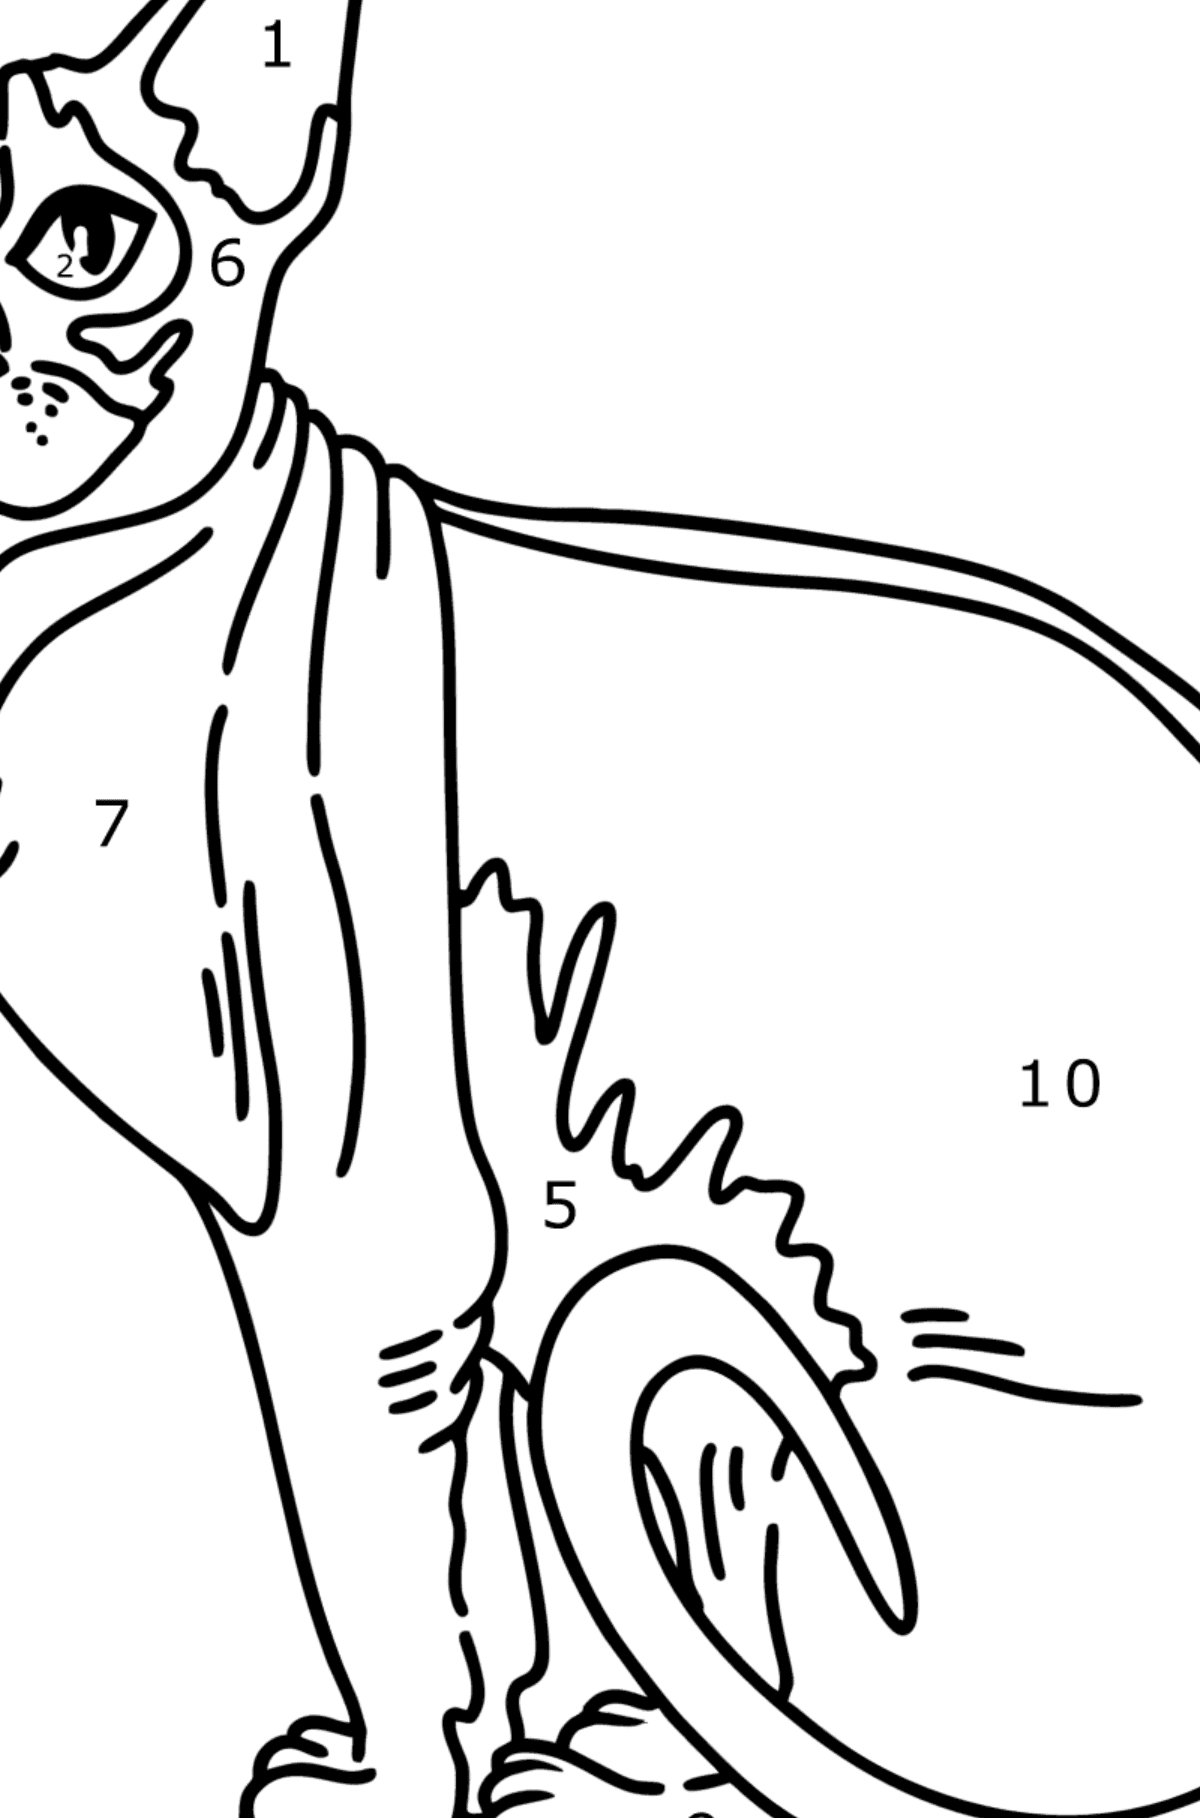 Sphynx Cat coloring page - Coloring by Numbers for Kids